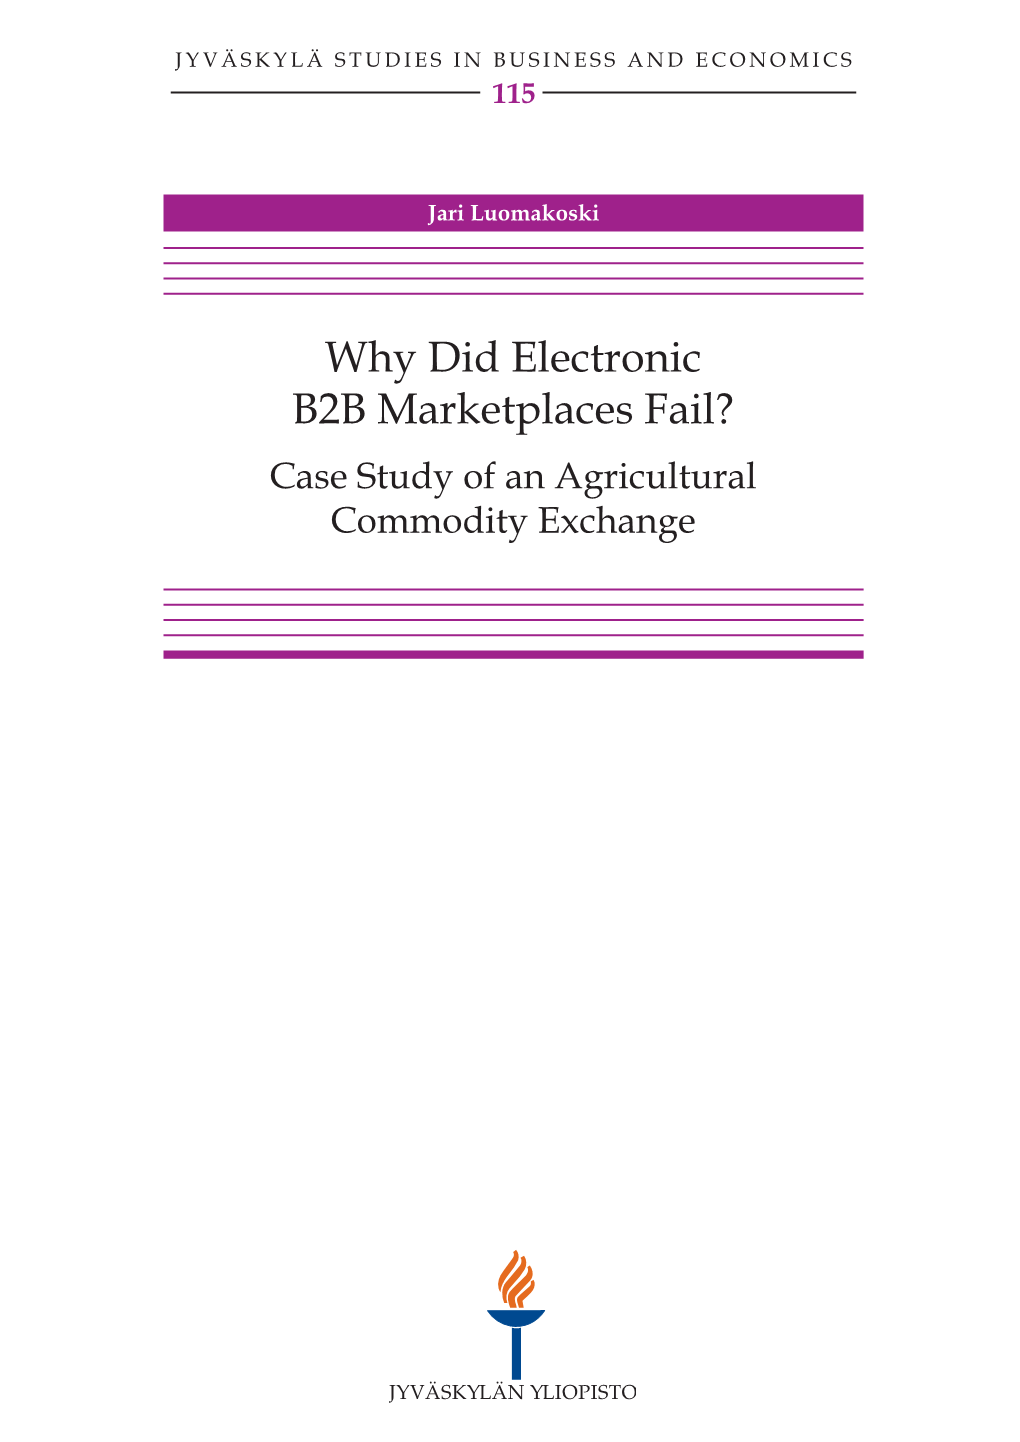 Why Did Electronic B2B Marketplaces Fail? Case Study of an Agricultural Commodity Exchange JYVÄSKYLÄ STUDIES in BUSINESS and ECONOMICS 115